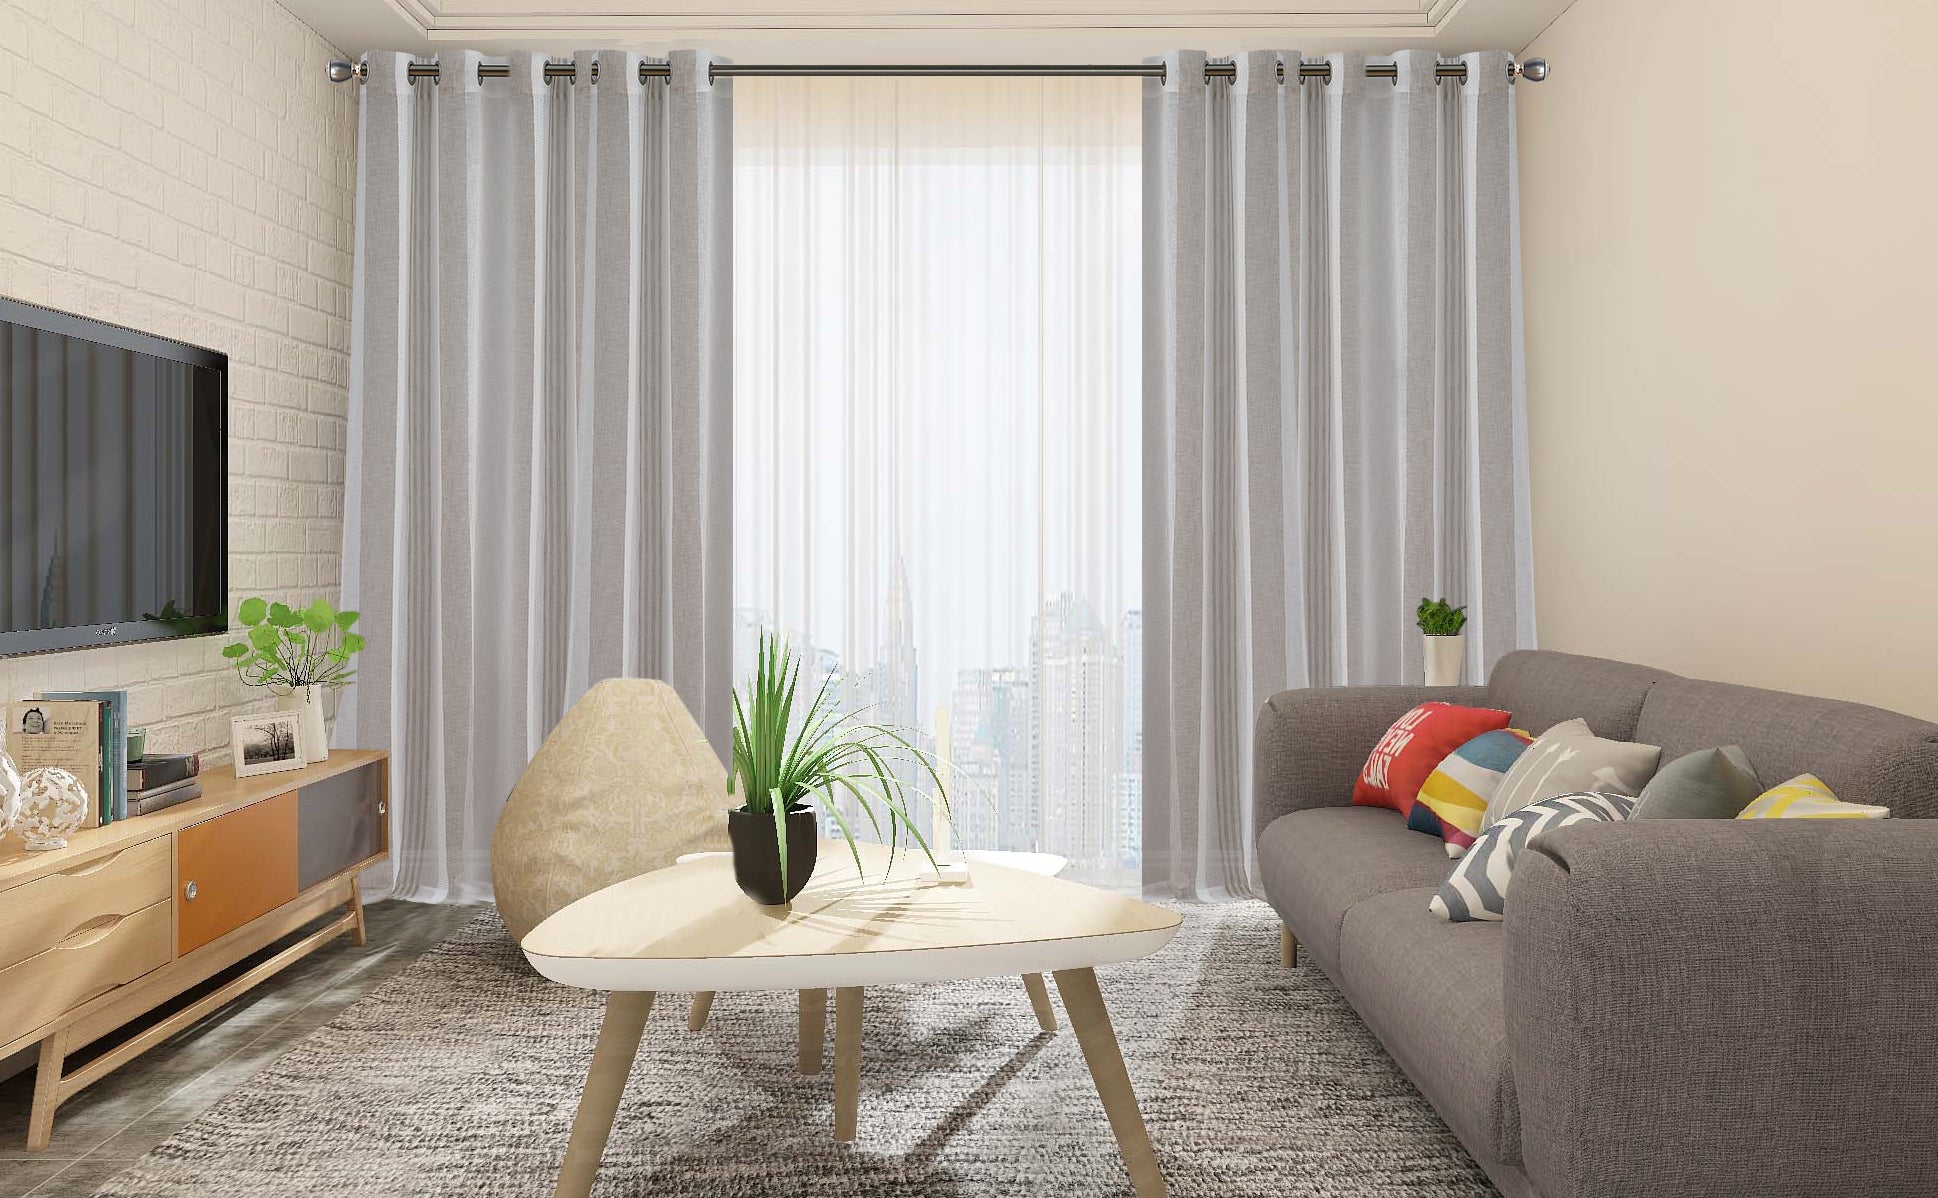 CAROMIO 52inch Sheer Curtains for Living Room Bedroom - Beige